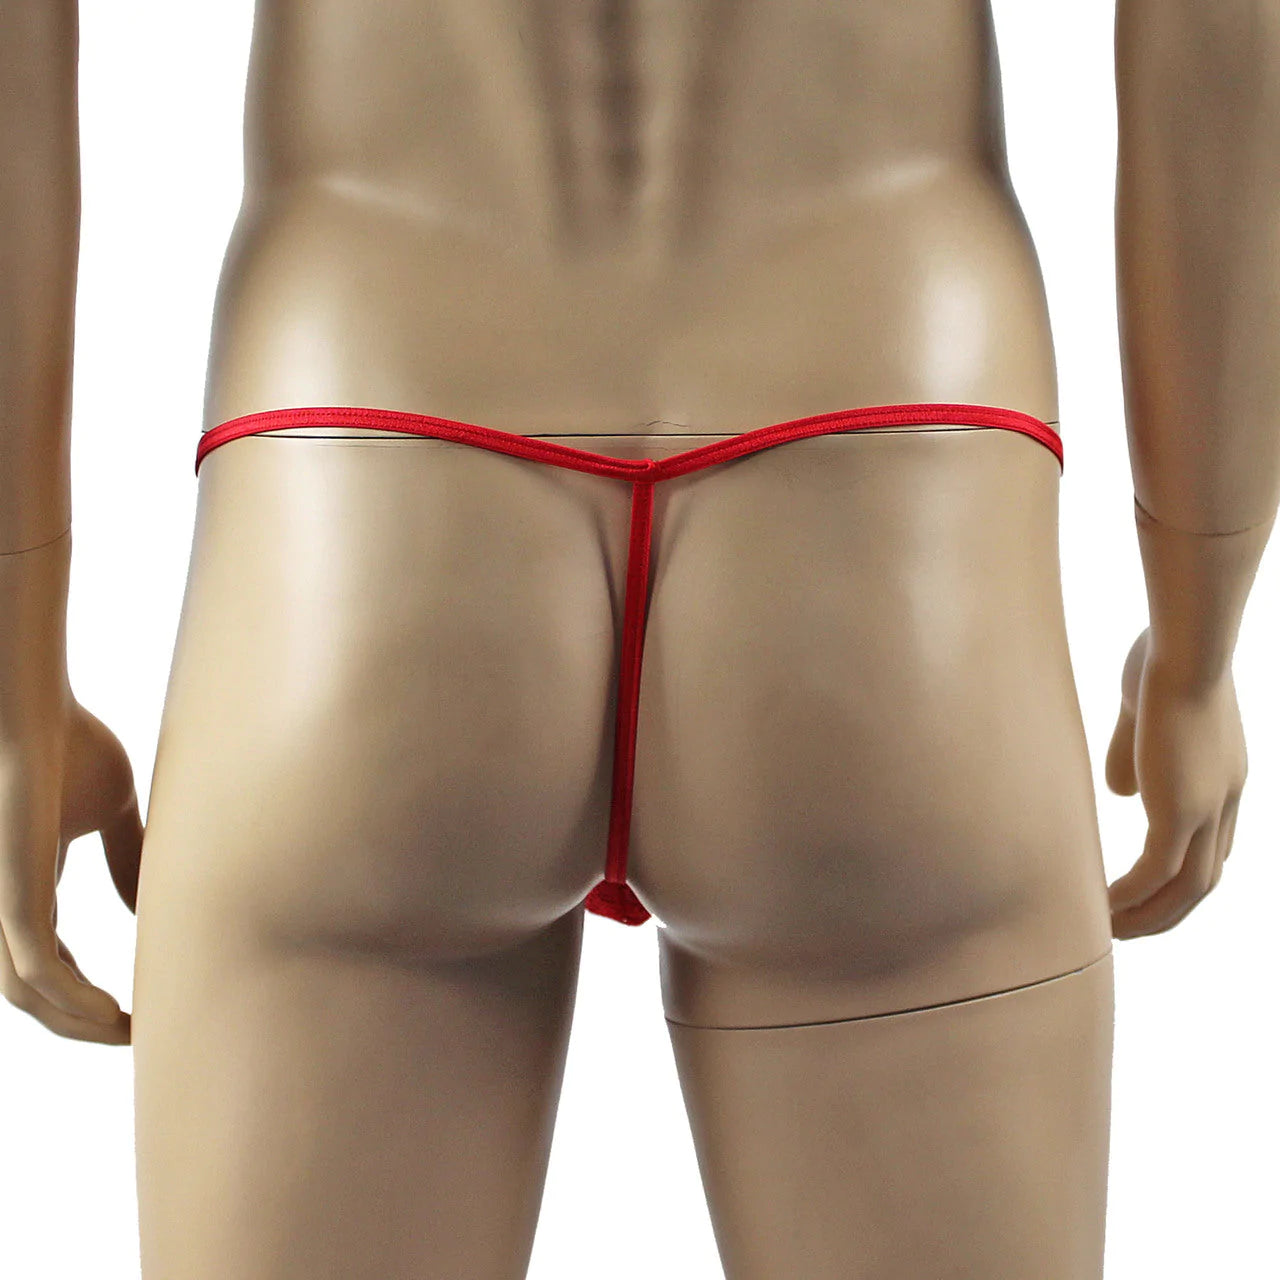 SALE - Mens Tease Circle Lace Pouch G string with Cute Bow Front Red